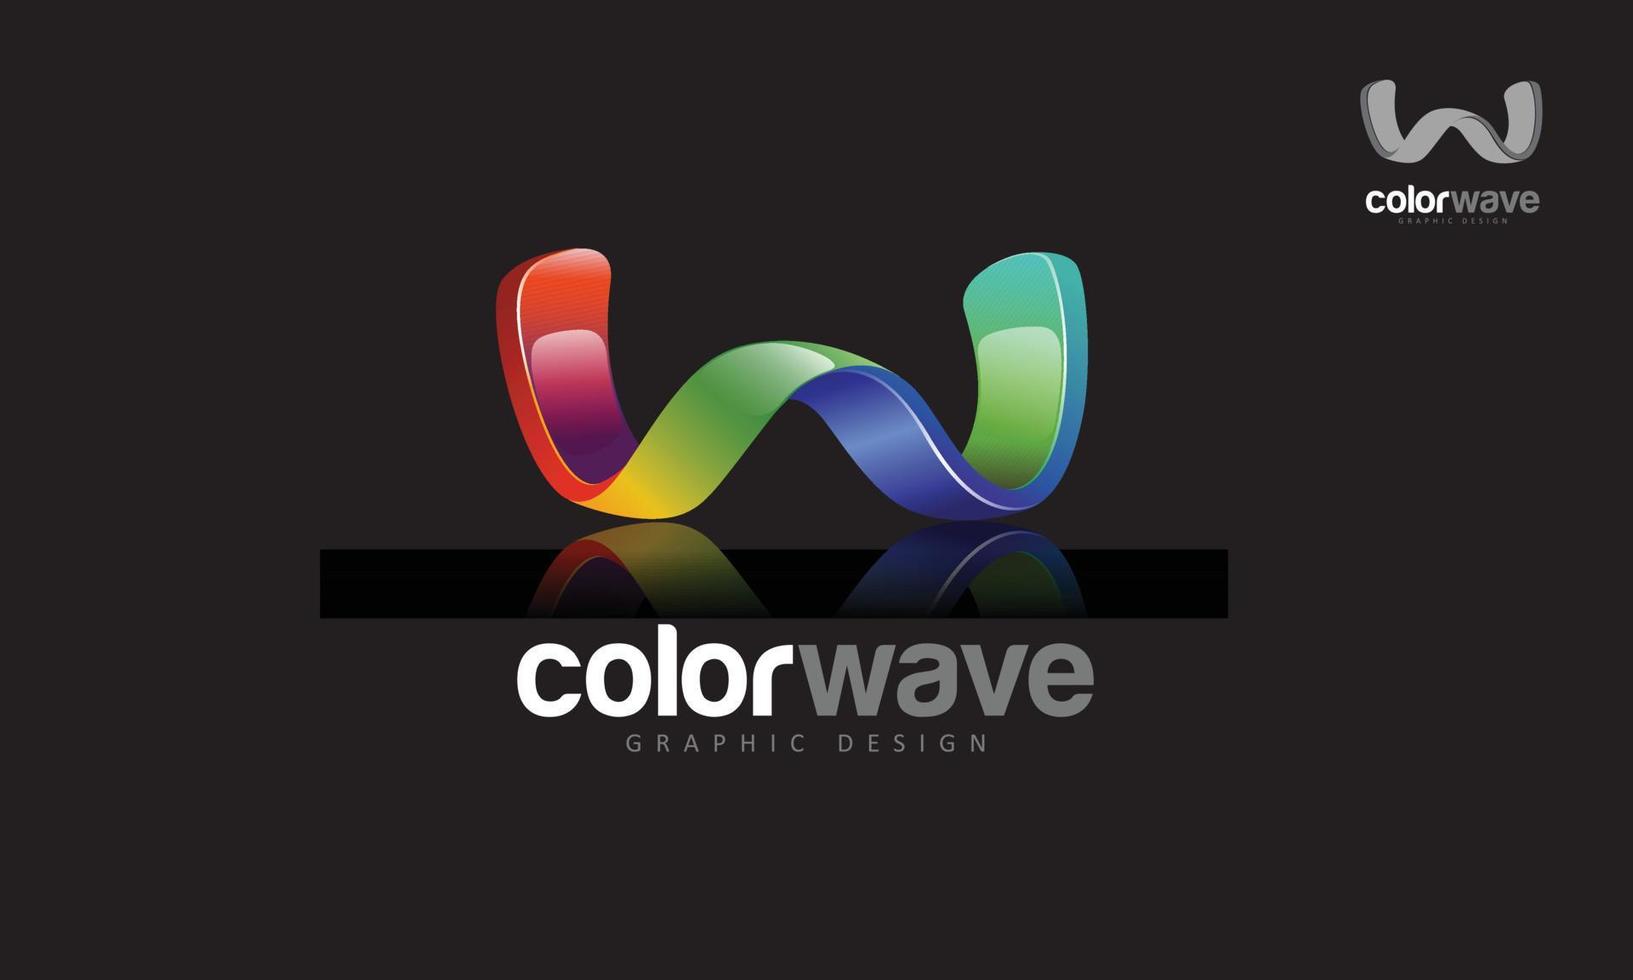 Color Wave Graphic Design Vector Logo Template. Creative 3D abstract vector logo design with shinny effect. this object look like wave or letter of W put on black background.